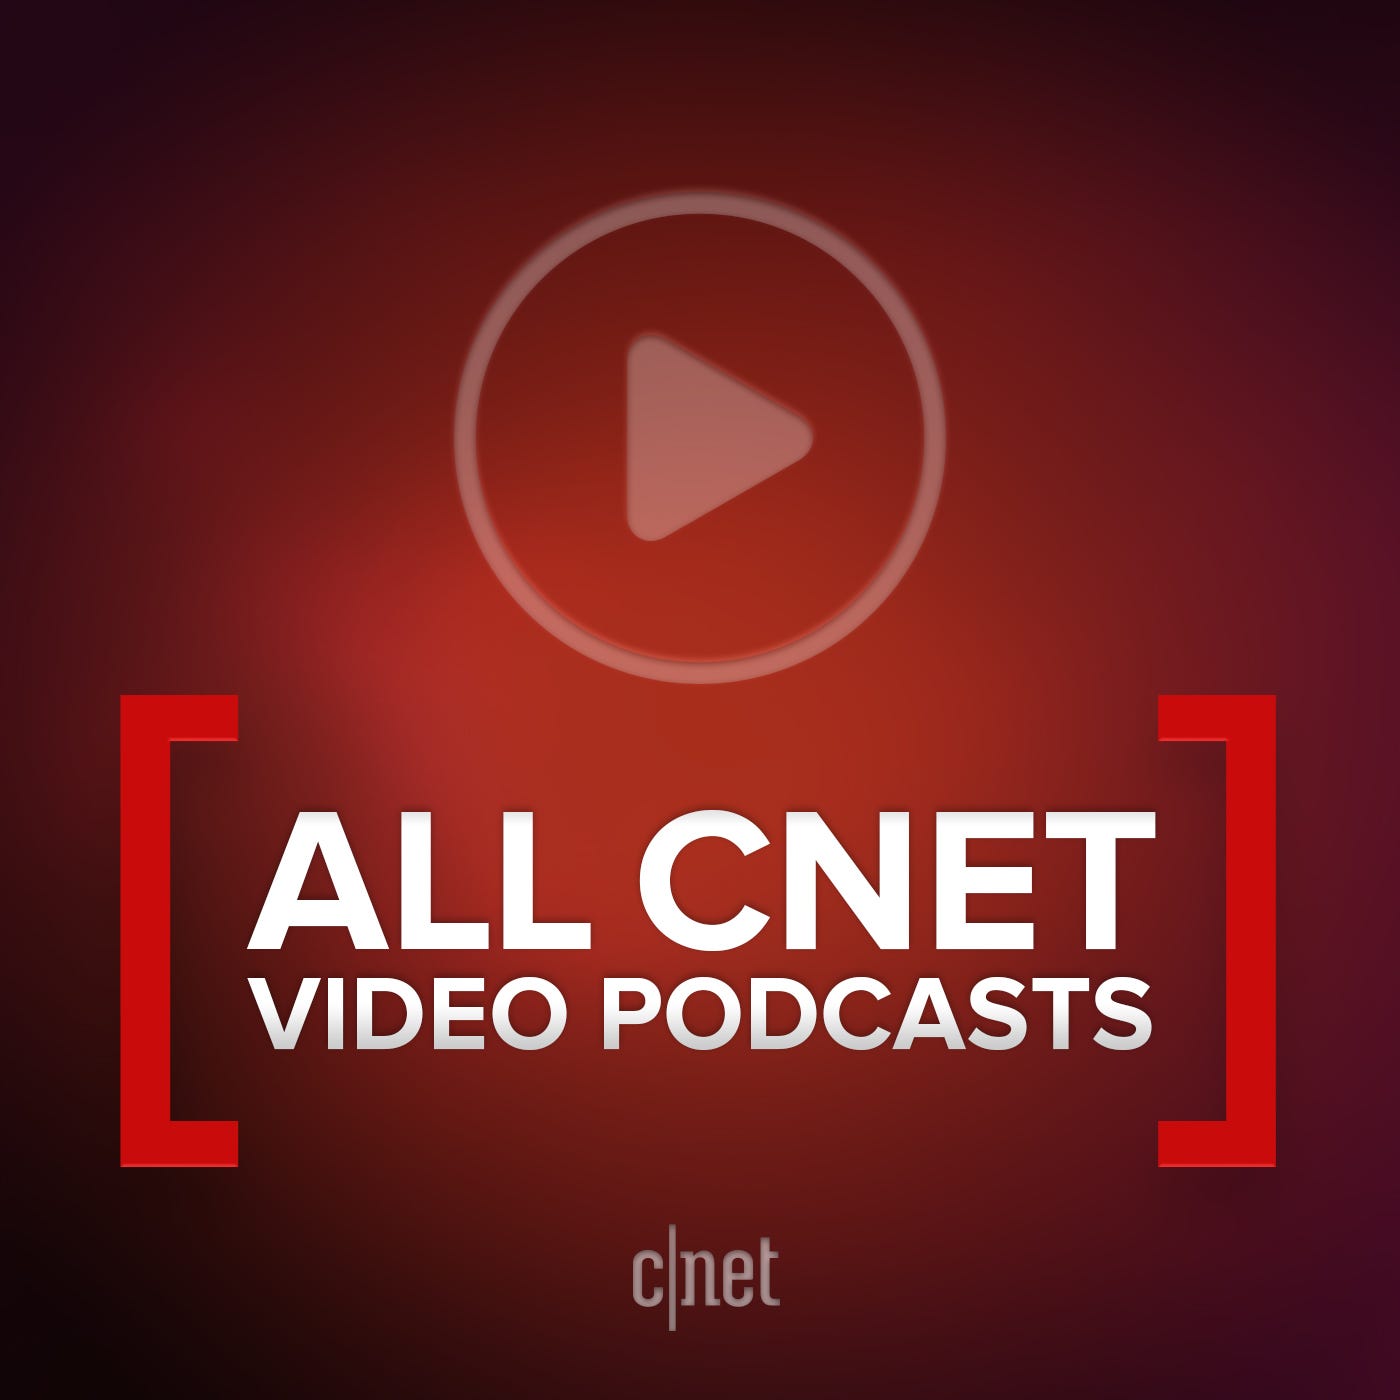 All CNET Video Podcasts (HQ) artwork